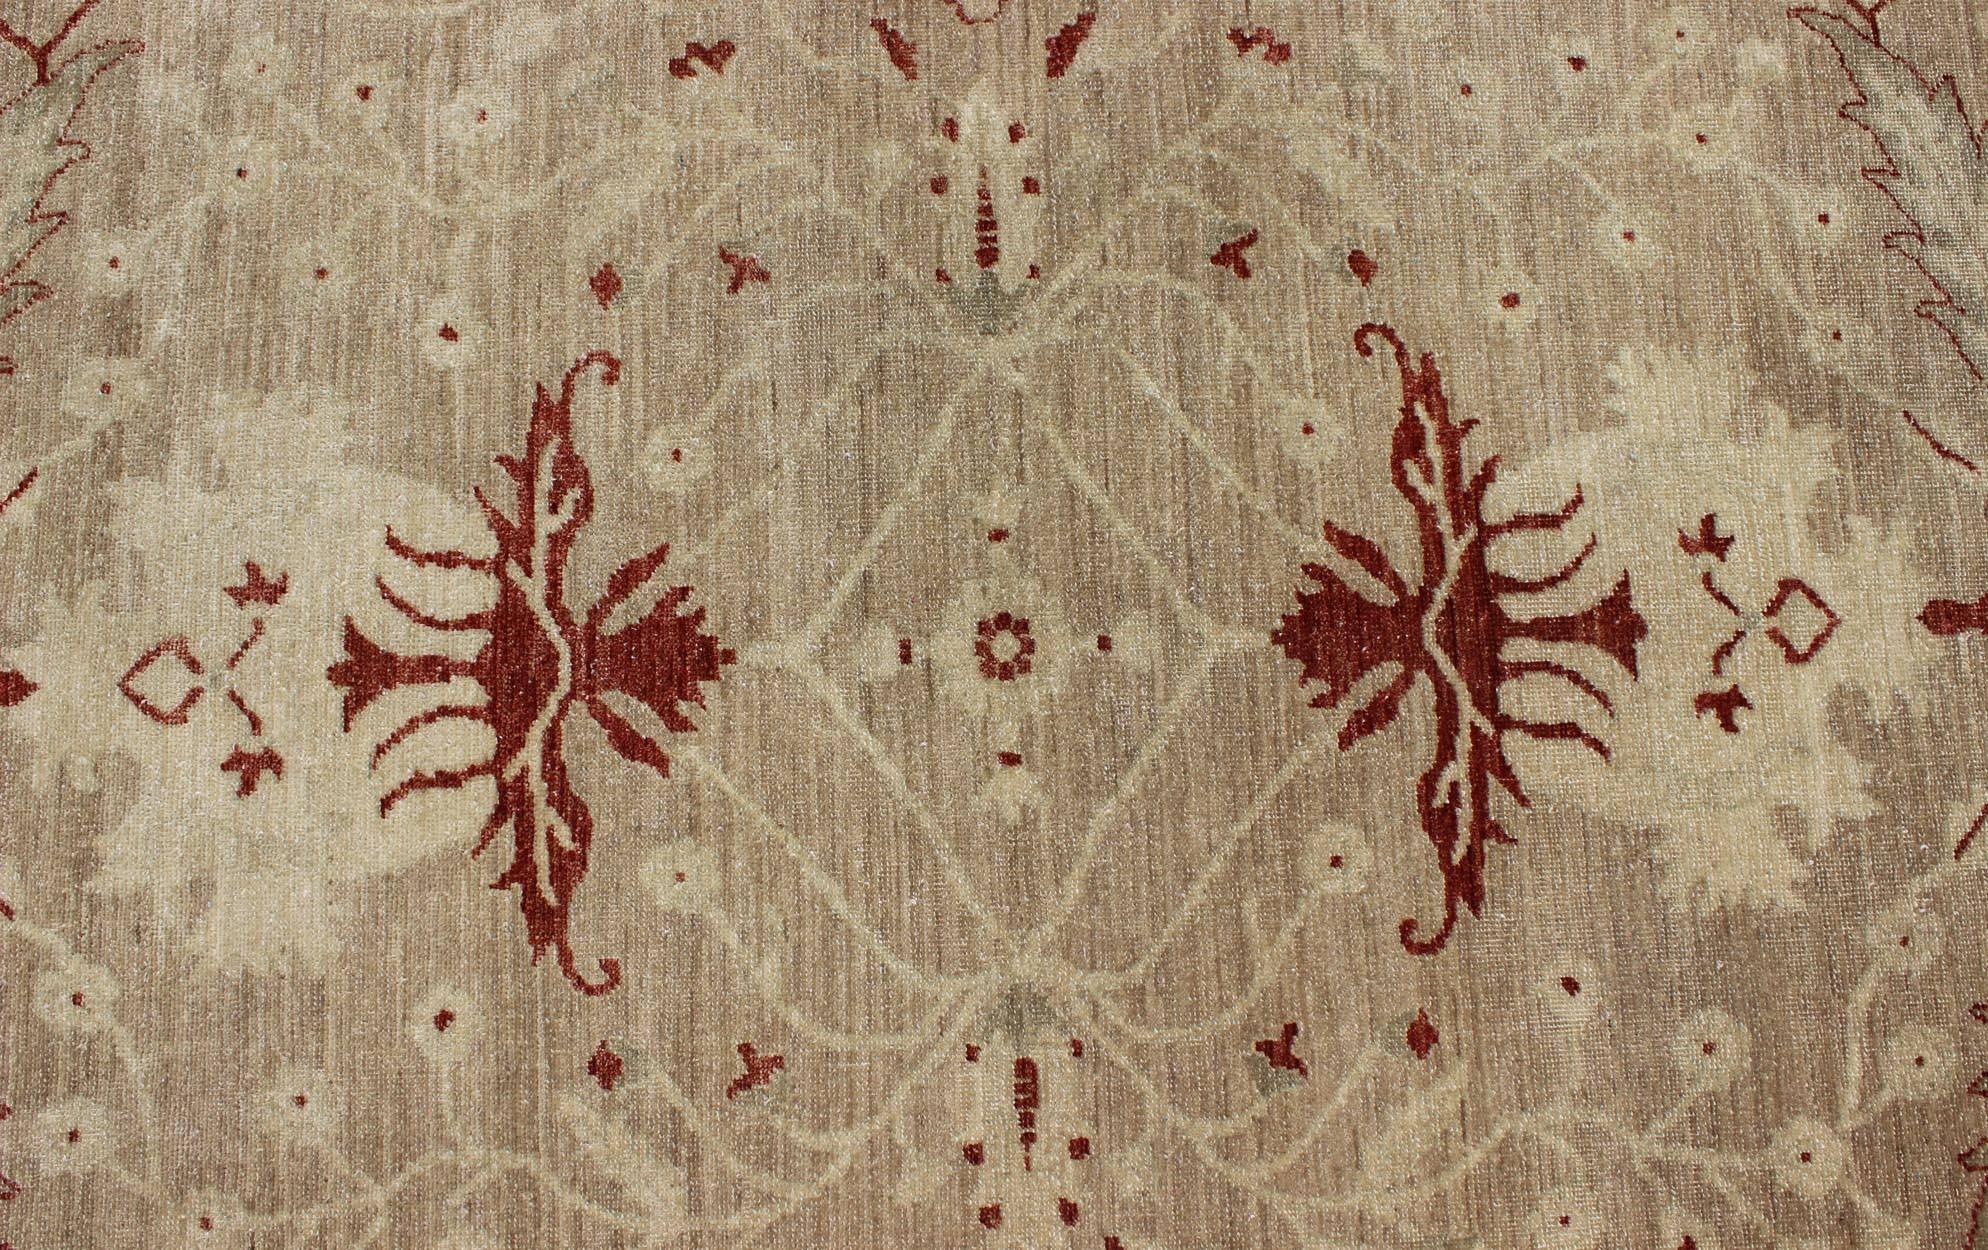 Sultanabad Design Rug with Stylized Design in Light Camel, Cream & Garnet Red For Sale 5